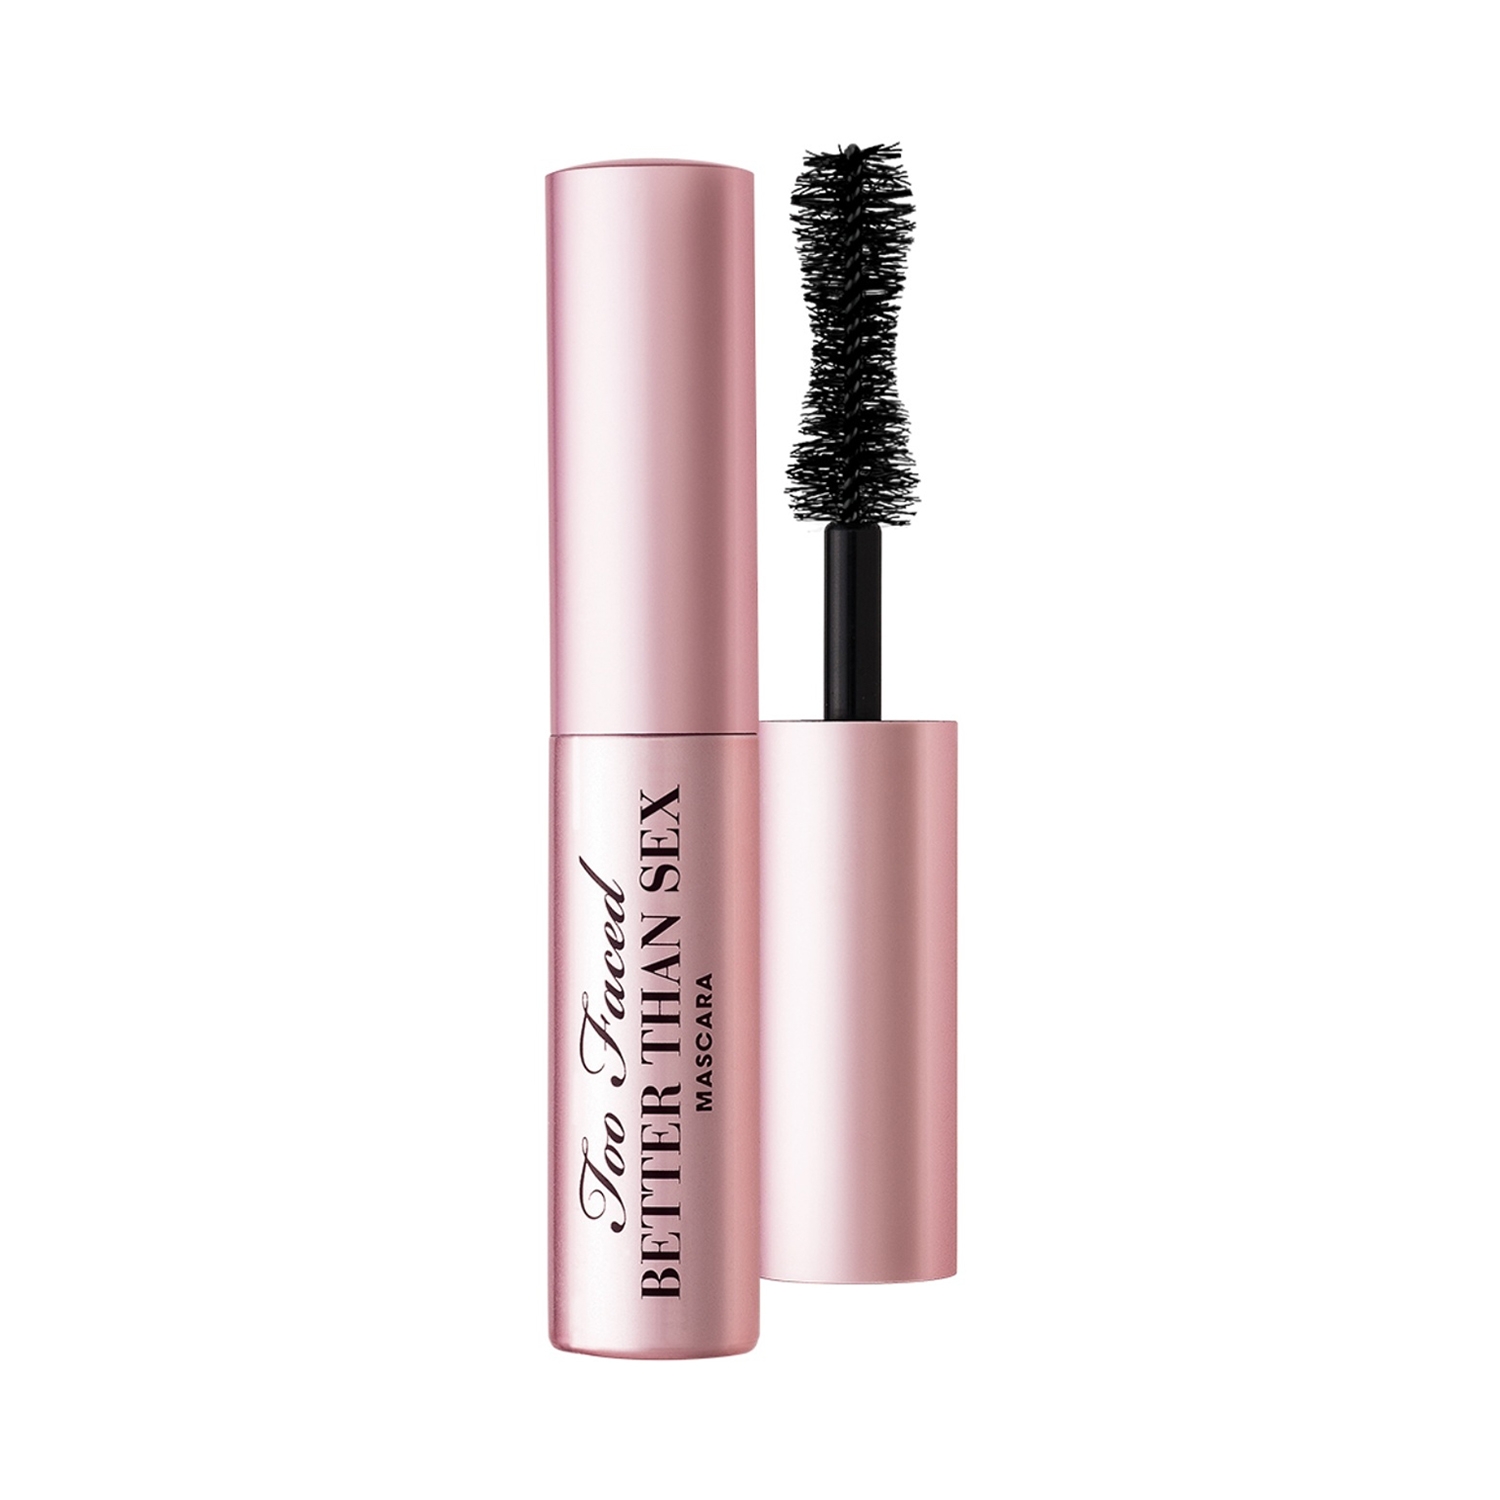 Too Faced | Too Faced Travel Size Better Than Sex Mascara, Black - (4.8g)